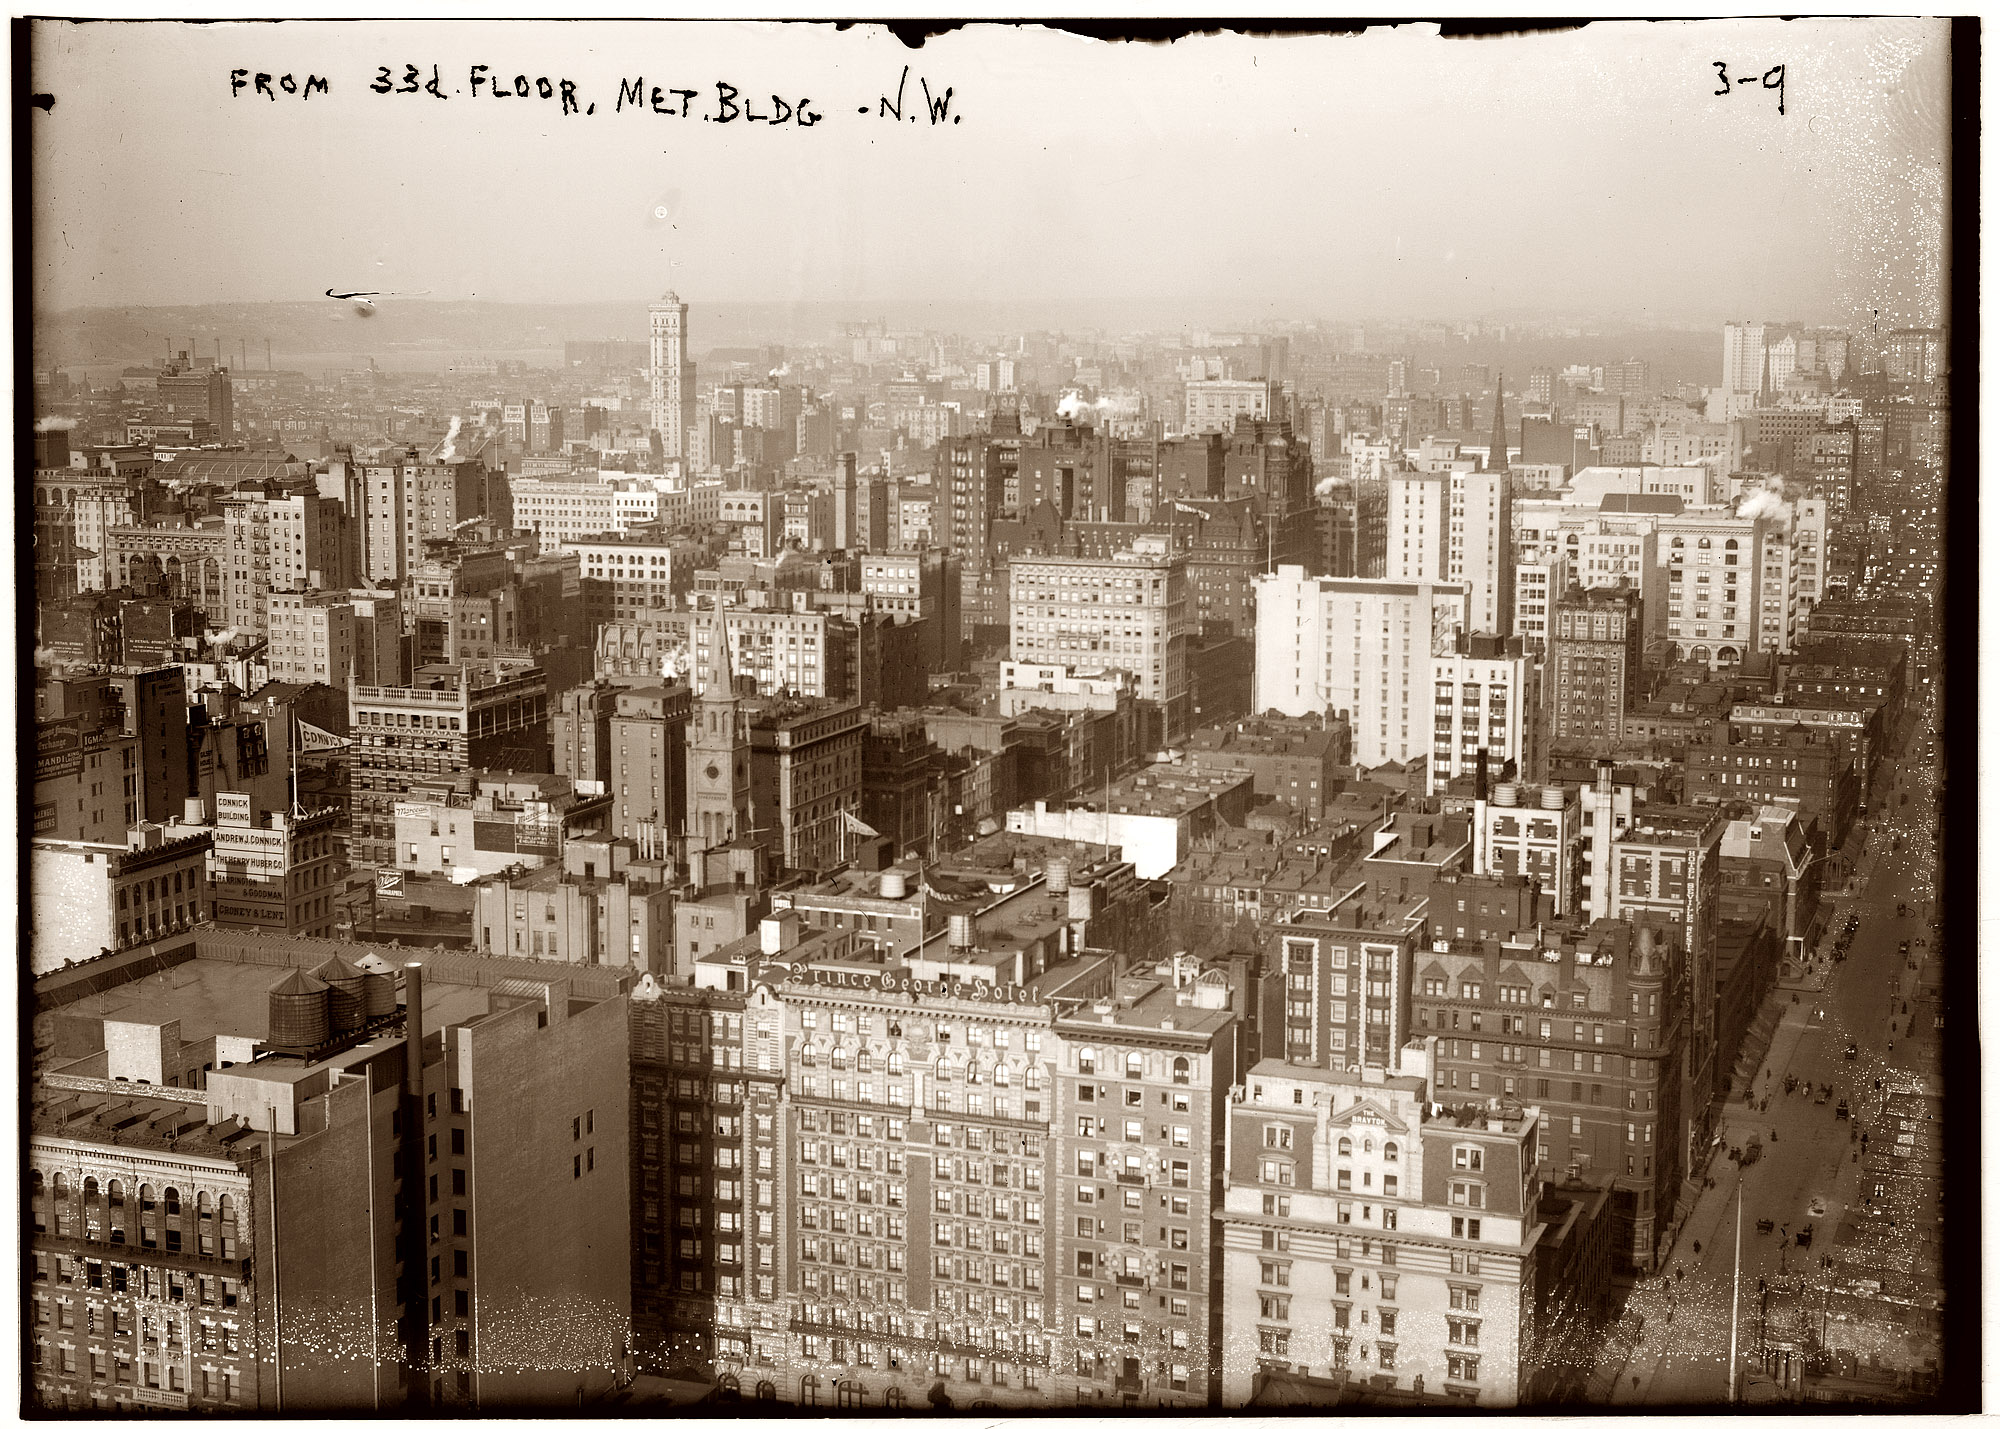 The New York of 1908 as seen from the 33rd floor of the Metropolitan Life building. View full size. 5x7 glass negative, George Grantham Bain Collection.